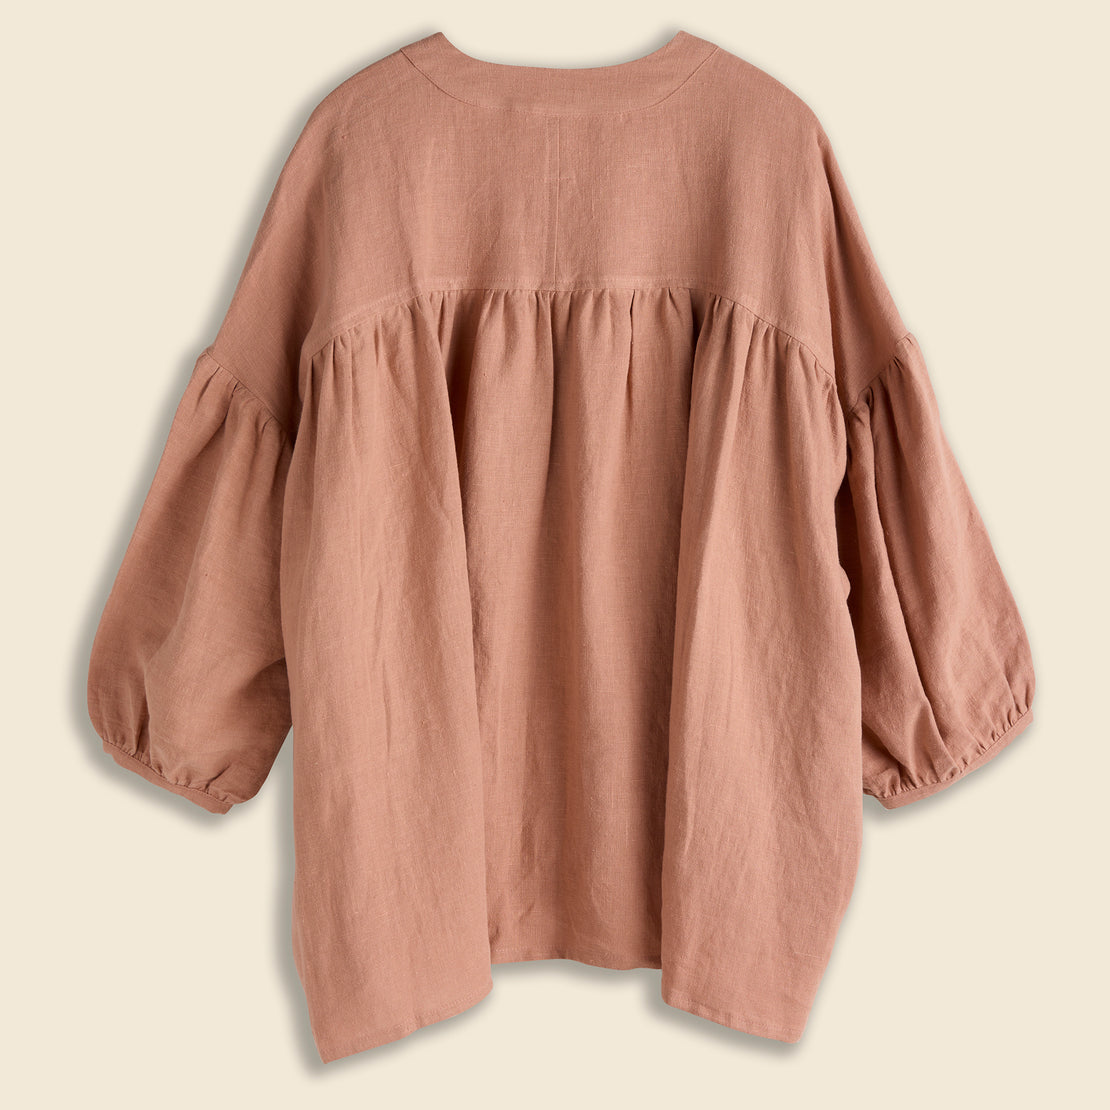 Dorothea Top - Hazel - Limo - STAG Provisions - W - Tops - L/S Woven